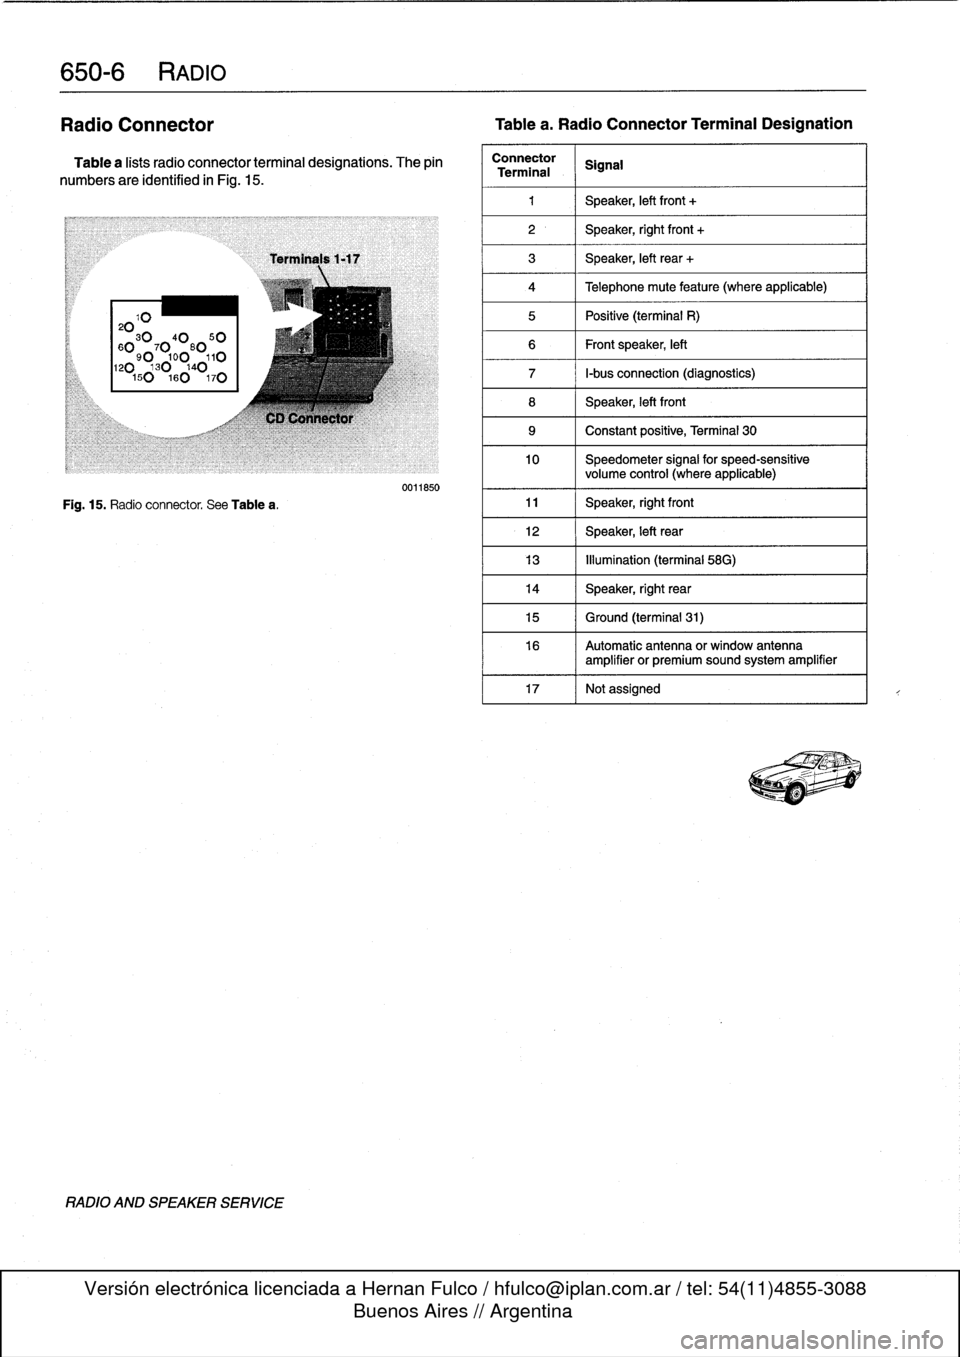 BMW 325i 1992 E36 Workshop Manual 
650-
6
RADIO

Radio
Connector

	

Tablea
.
Radio
Connector
Terminal
Designation

Table
a
lists
radio
connector
terminal
designations
.
The
pin

numbers
are
identified
in
Fig
.
15
.

20103040
50

60
9